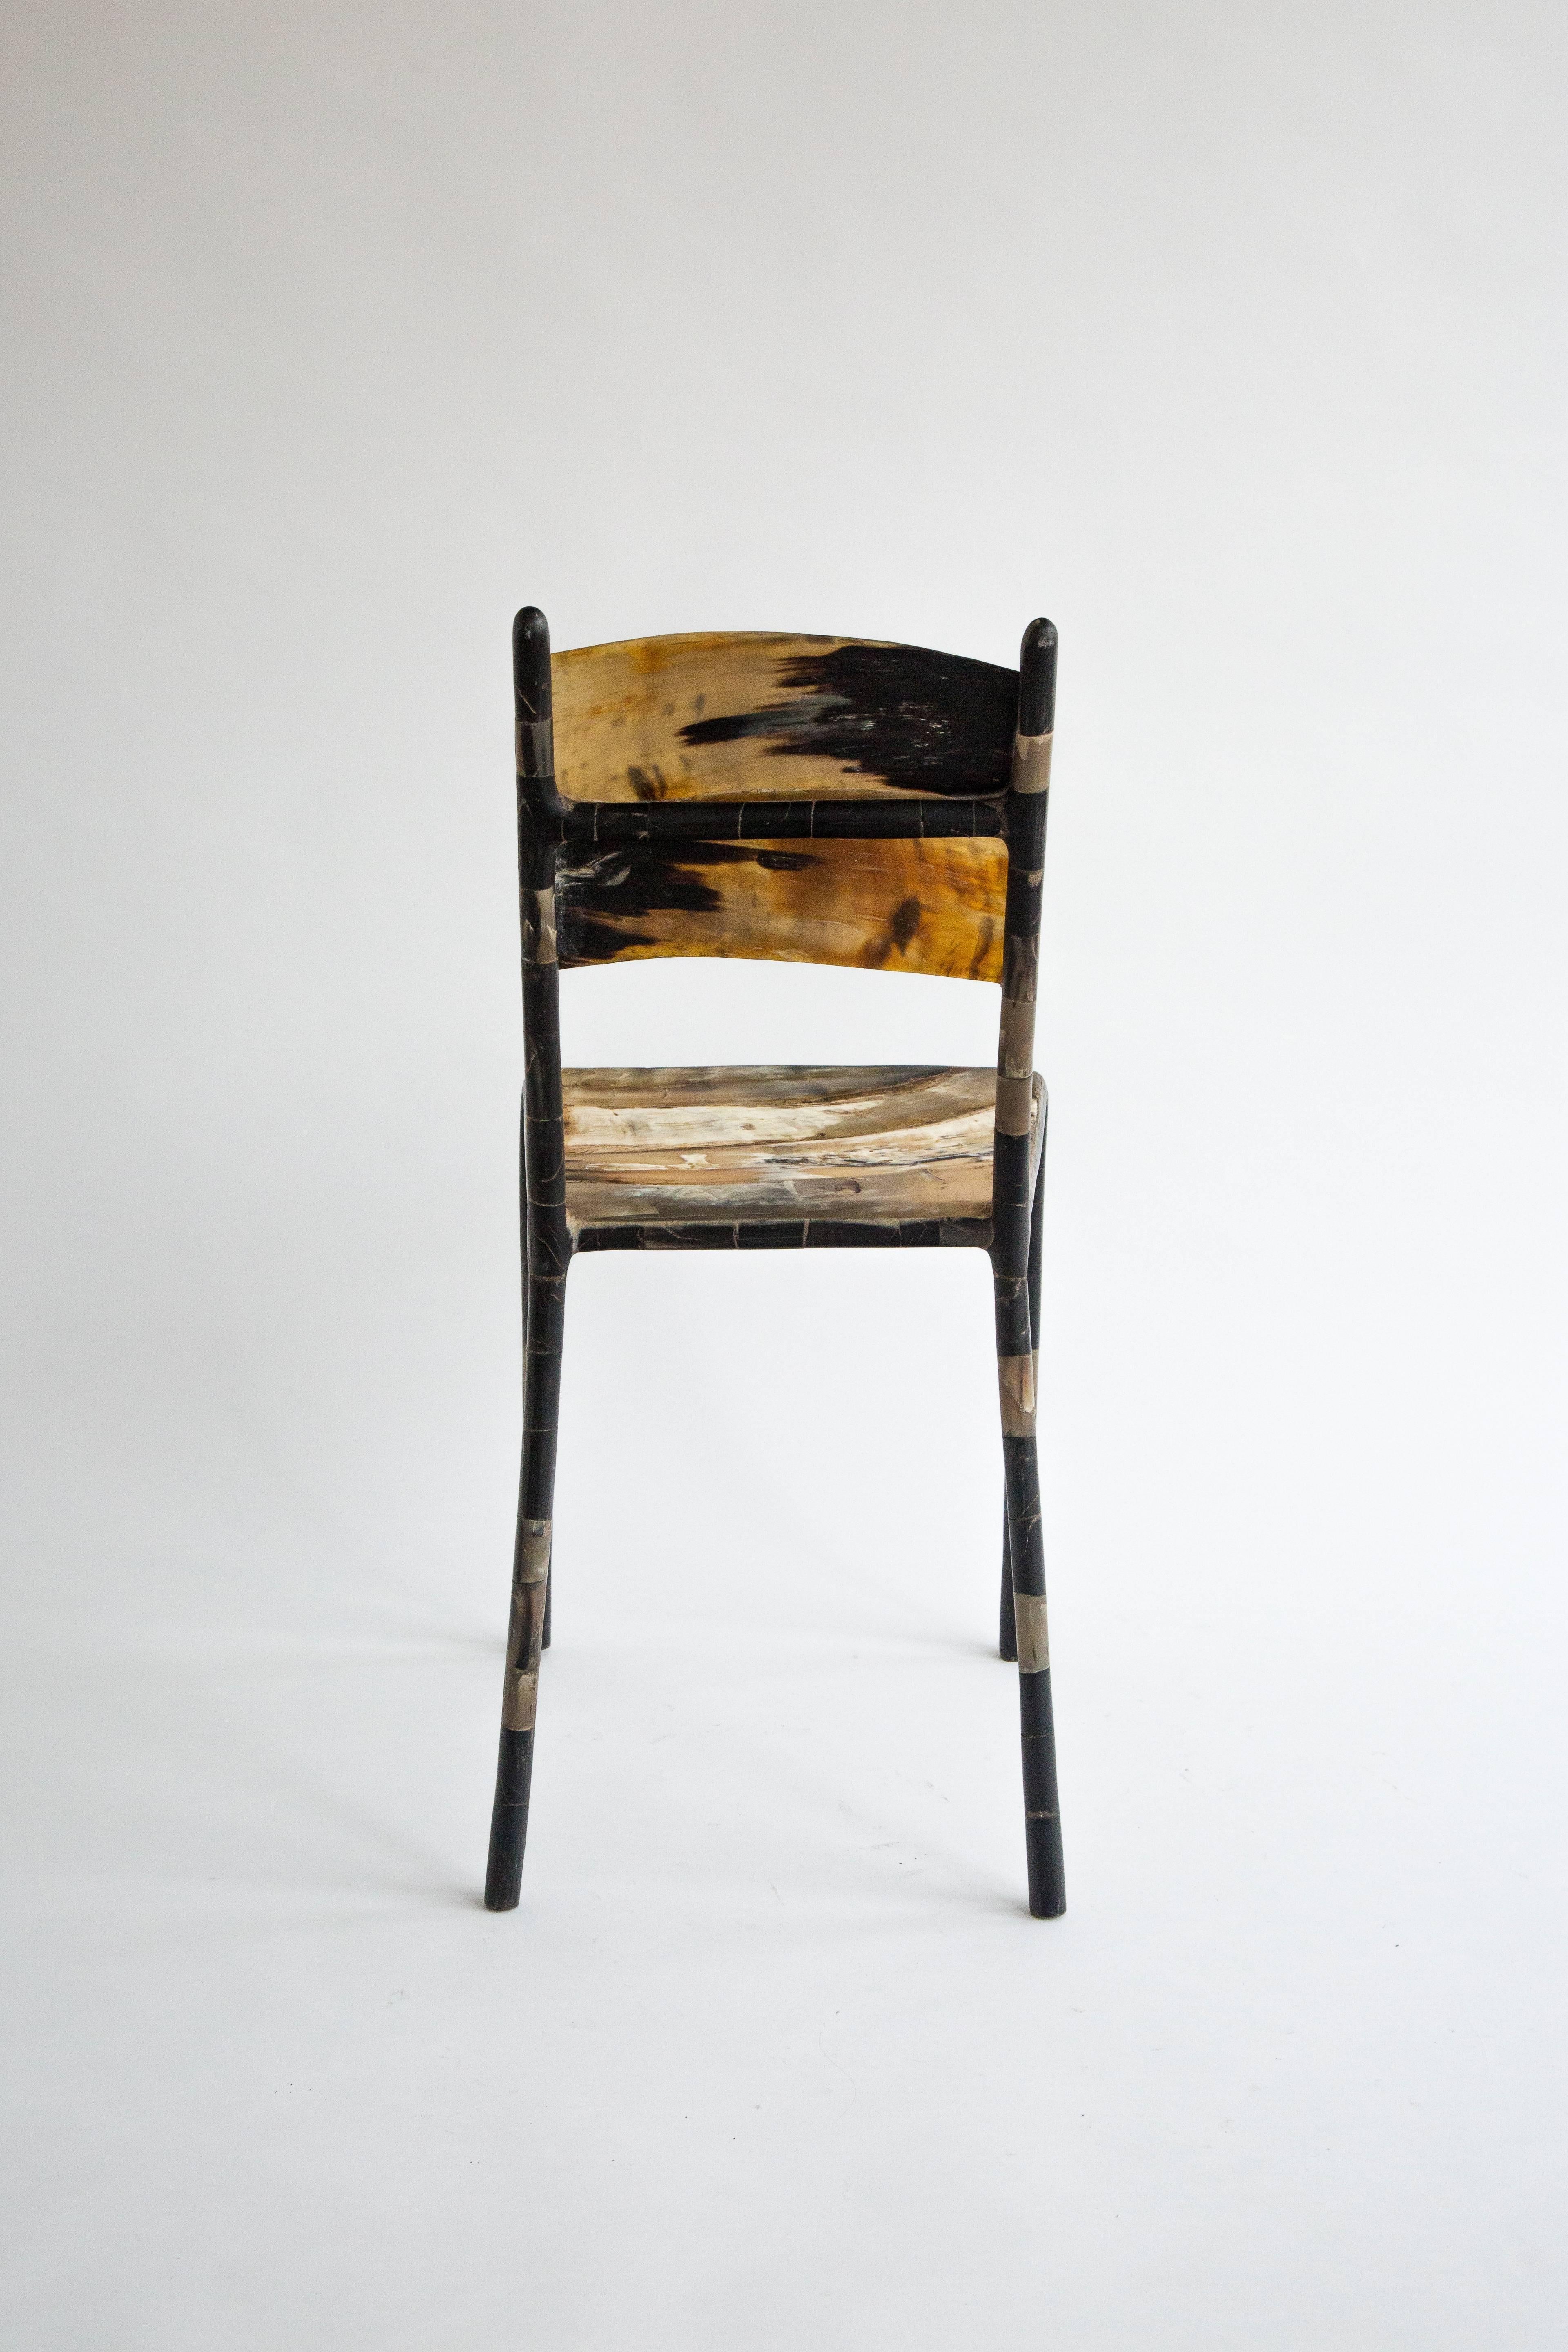 Senegalese Contemporary Horn Chair by Balla N'iang, 2018 For Sale